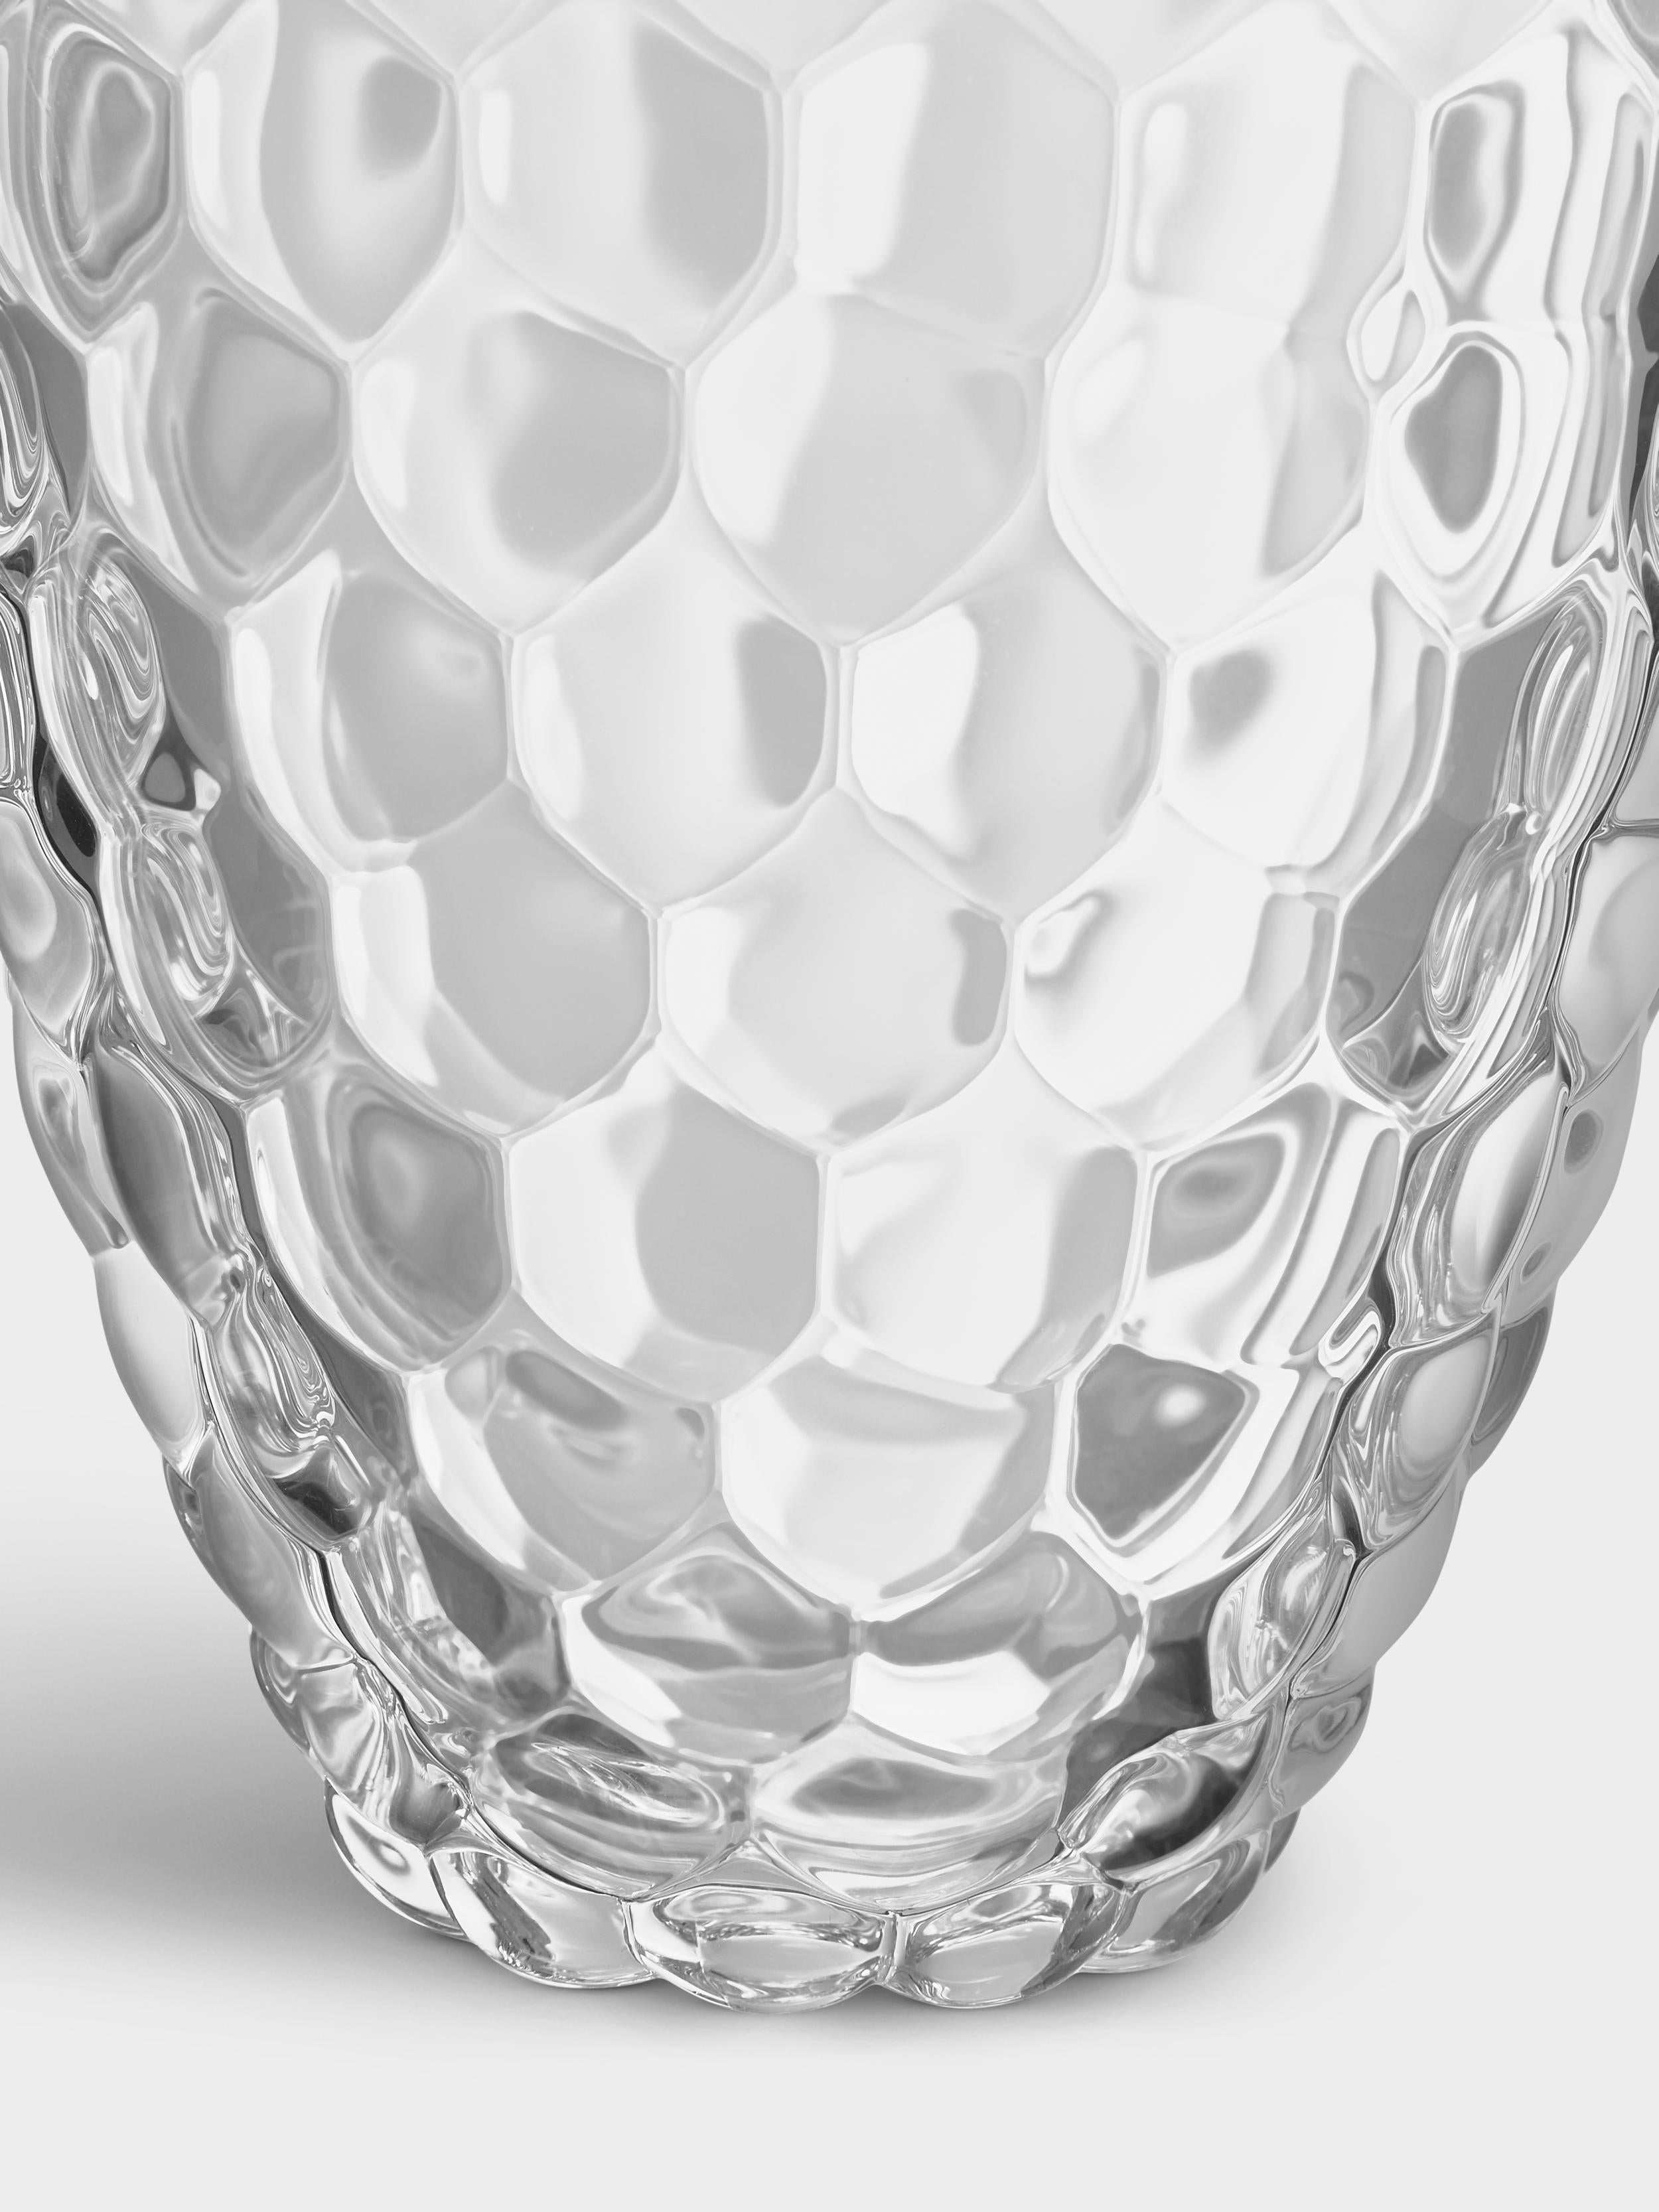 Raspberry is a beloved Orrefors classic. The large vase in clear crystal has a design resembling a raspberry with its round ‘drupelets’ giving it a soft look. The vase is perfect for long stem flowers or simply as a decorative object on its own.